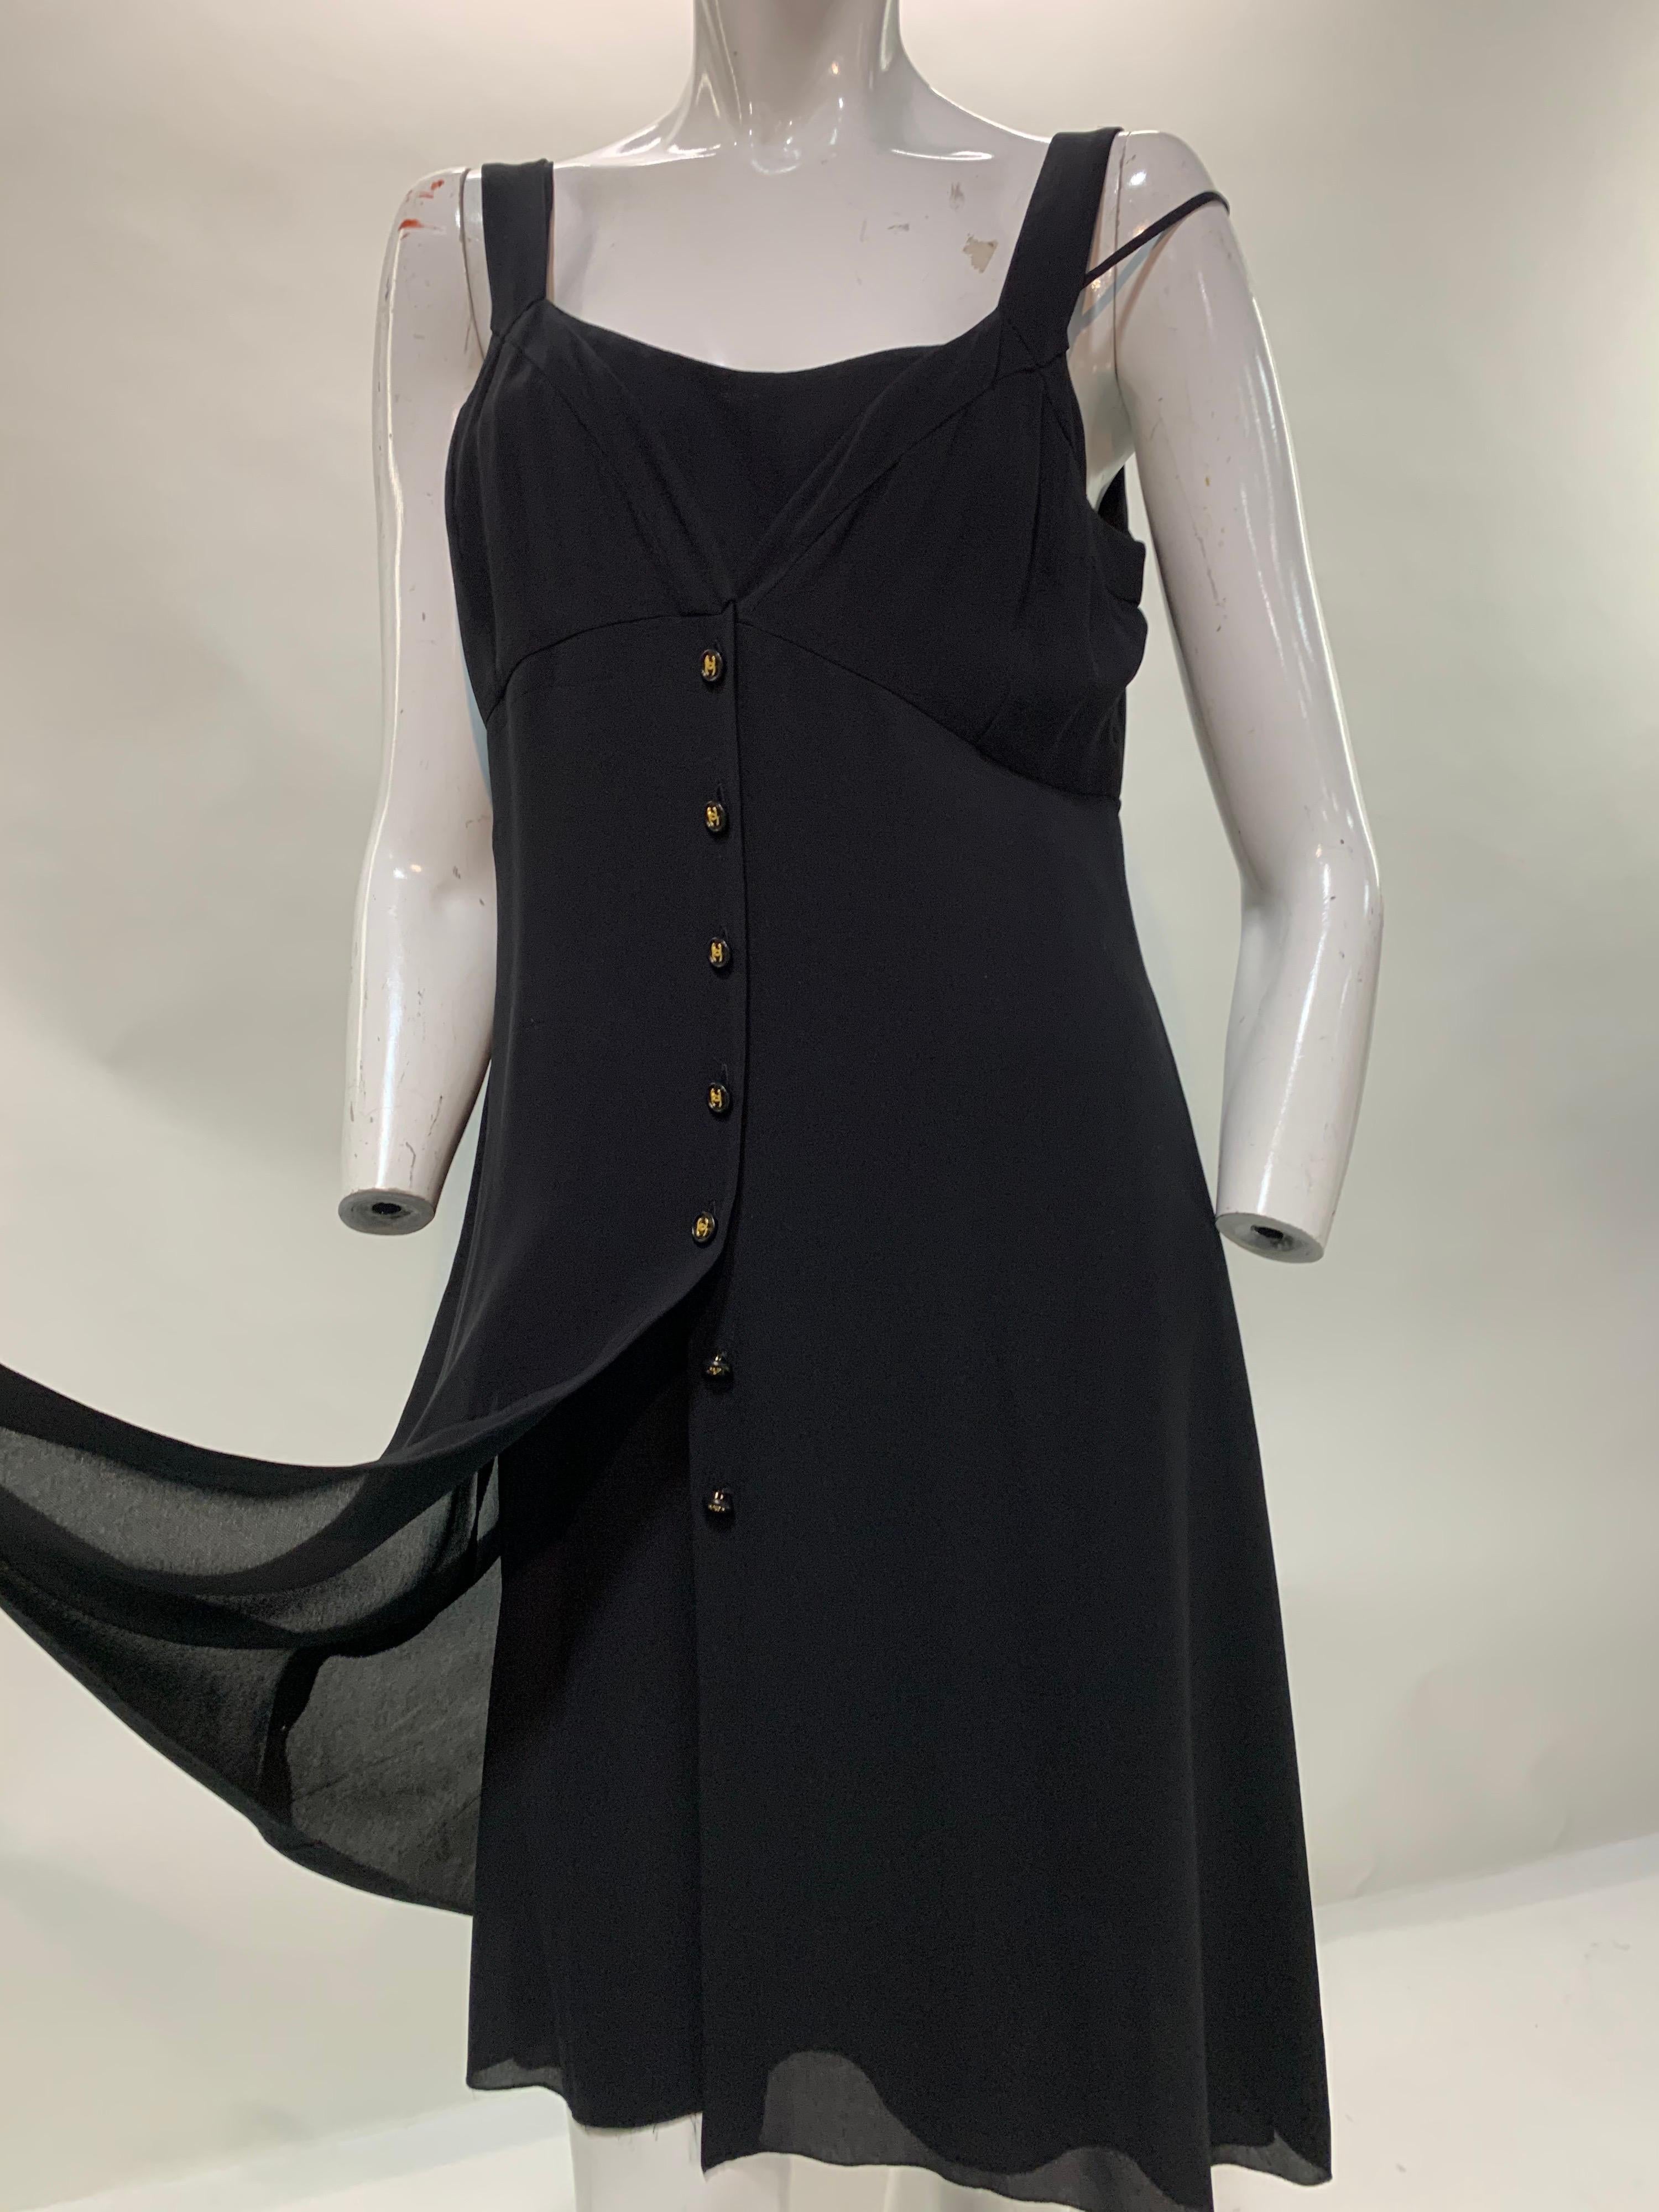 1997 Chanel by Lagerfeld Black 2-Piece Slip and Button Down Crepe Dress Ensemble 1